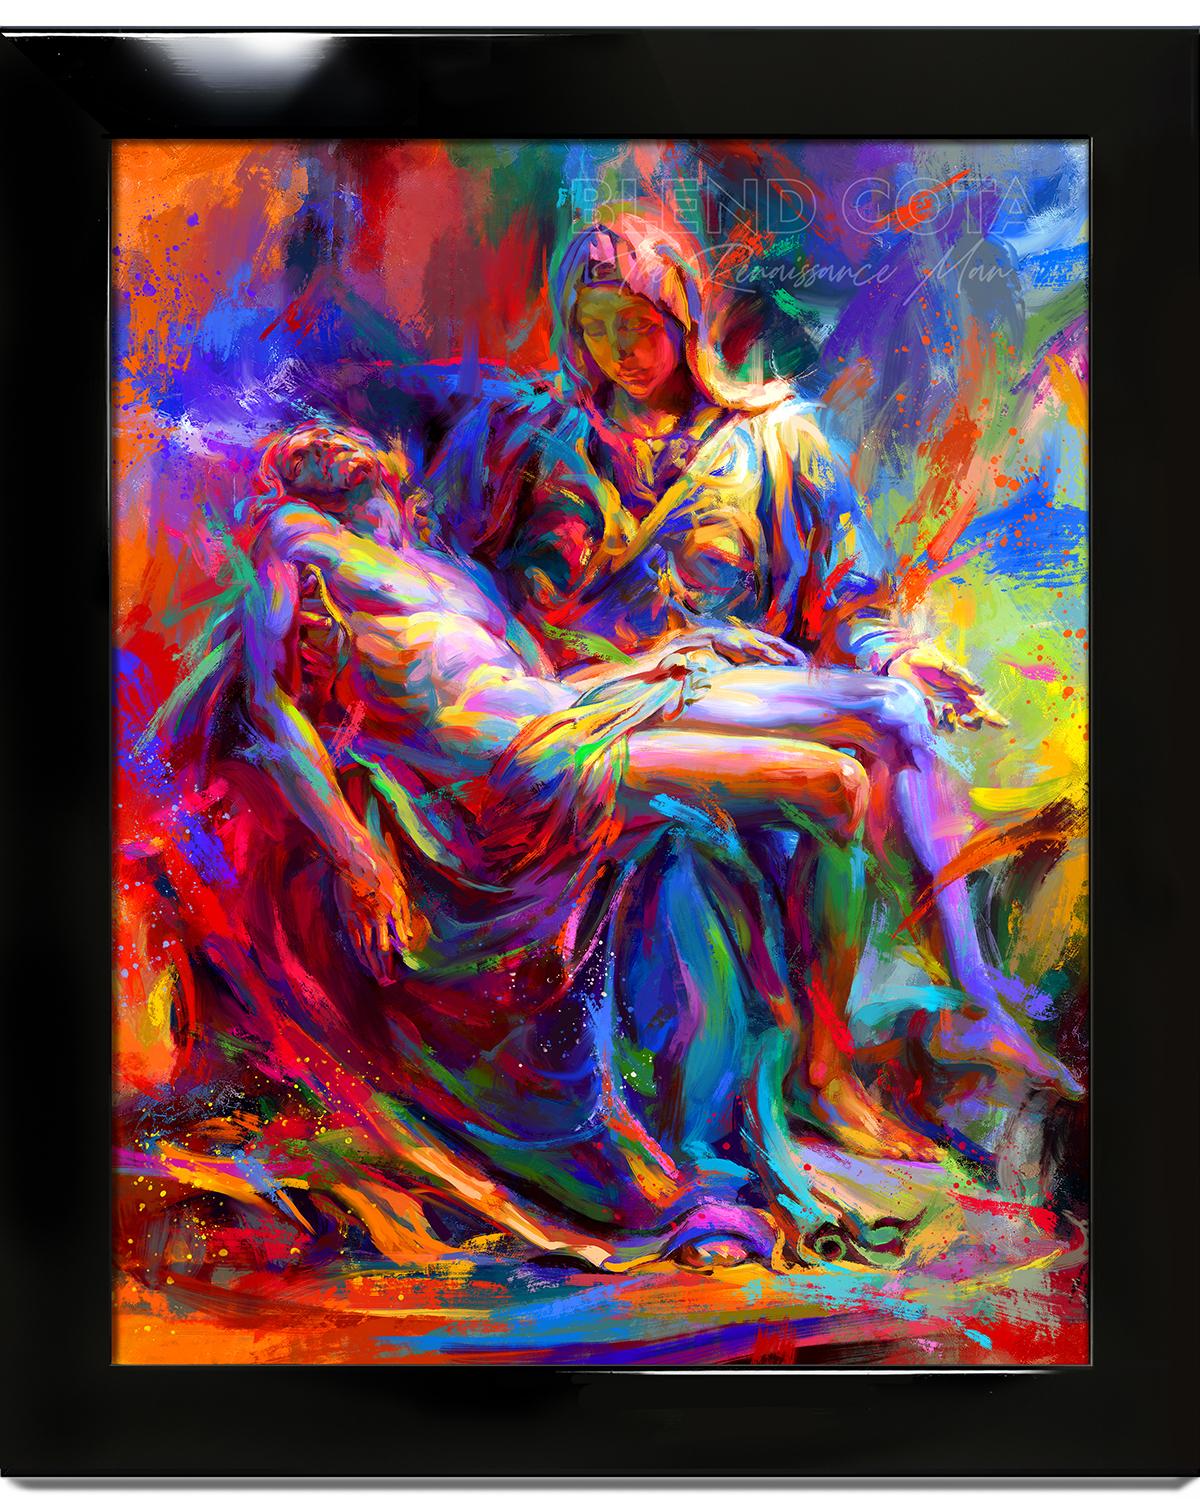 The Colors of Pieta - Original oil on canvas painting - Painting by Blend Cota